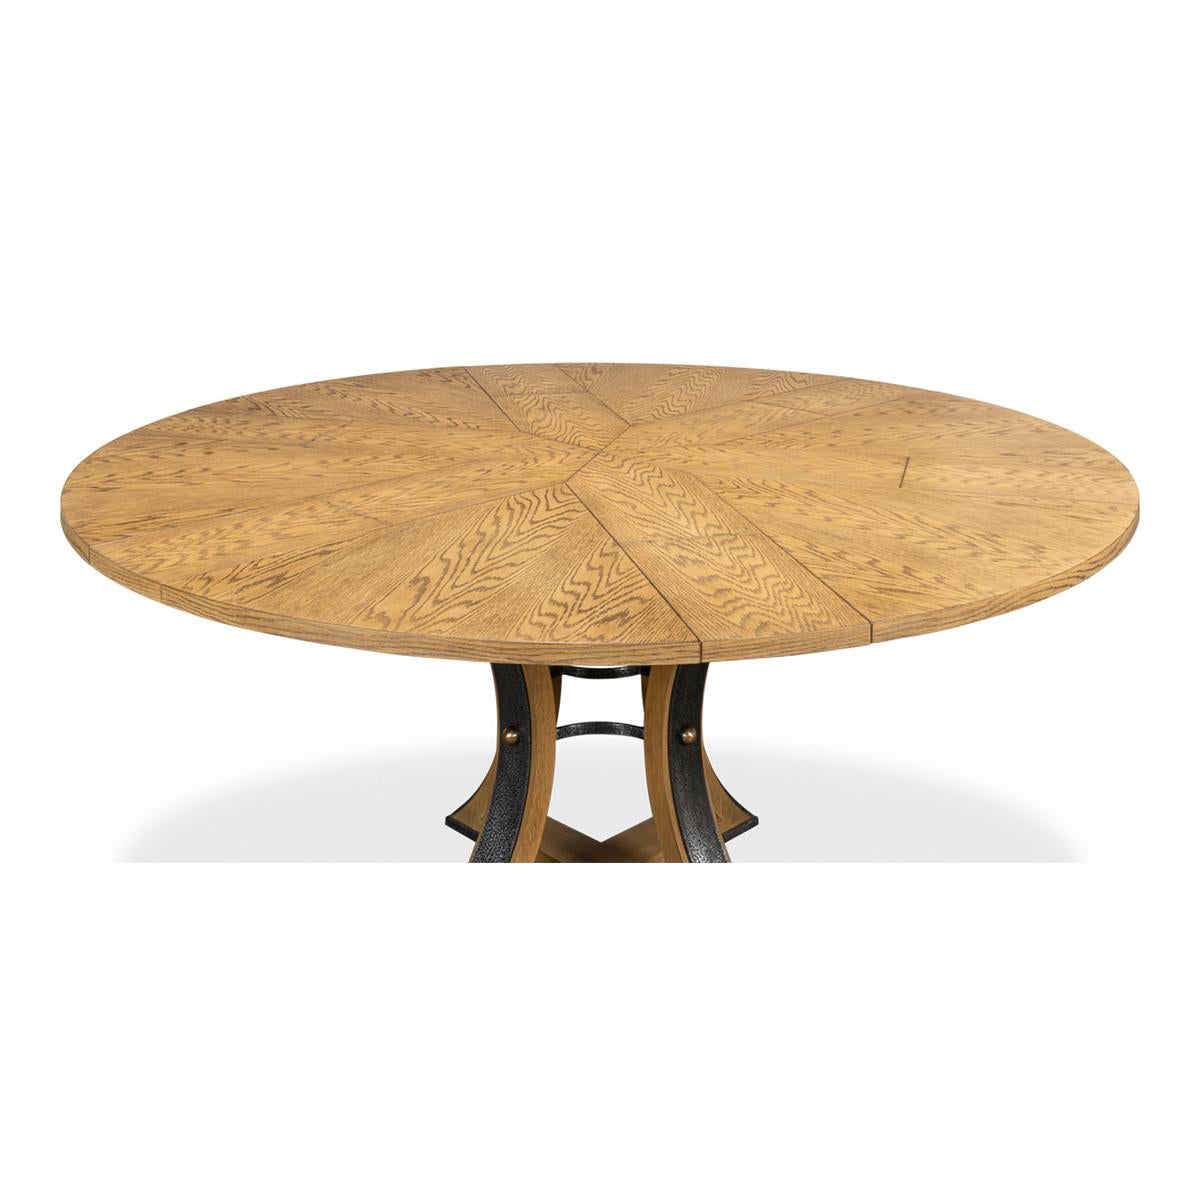 Vietnamese Modern Industrial Round Dining Table - 70 - Heather Grey For Sale